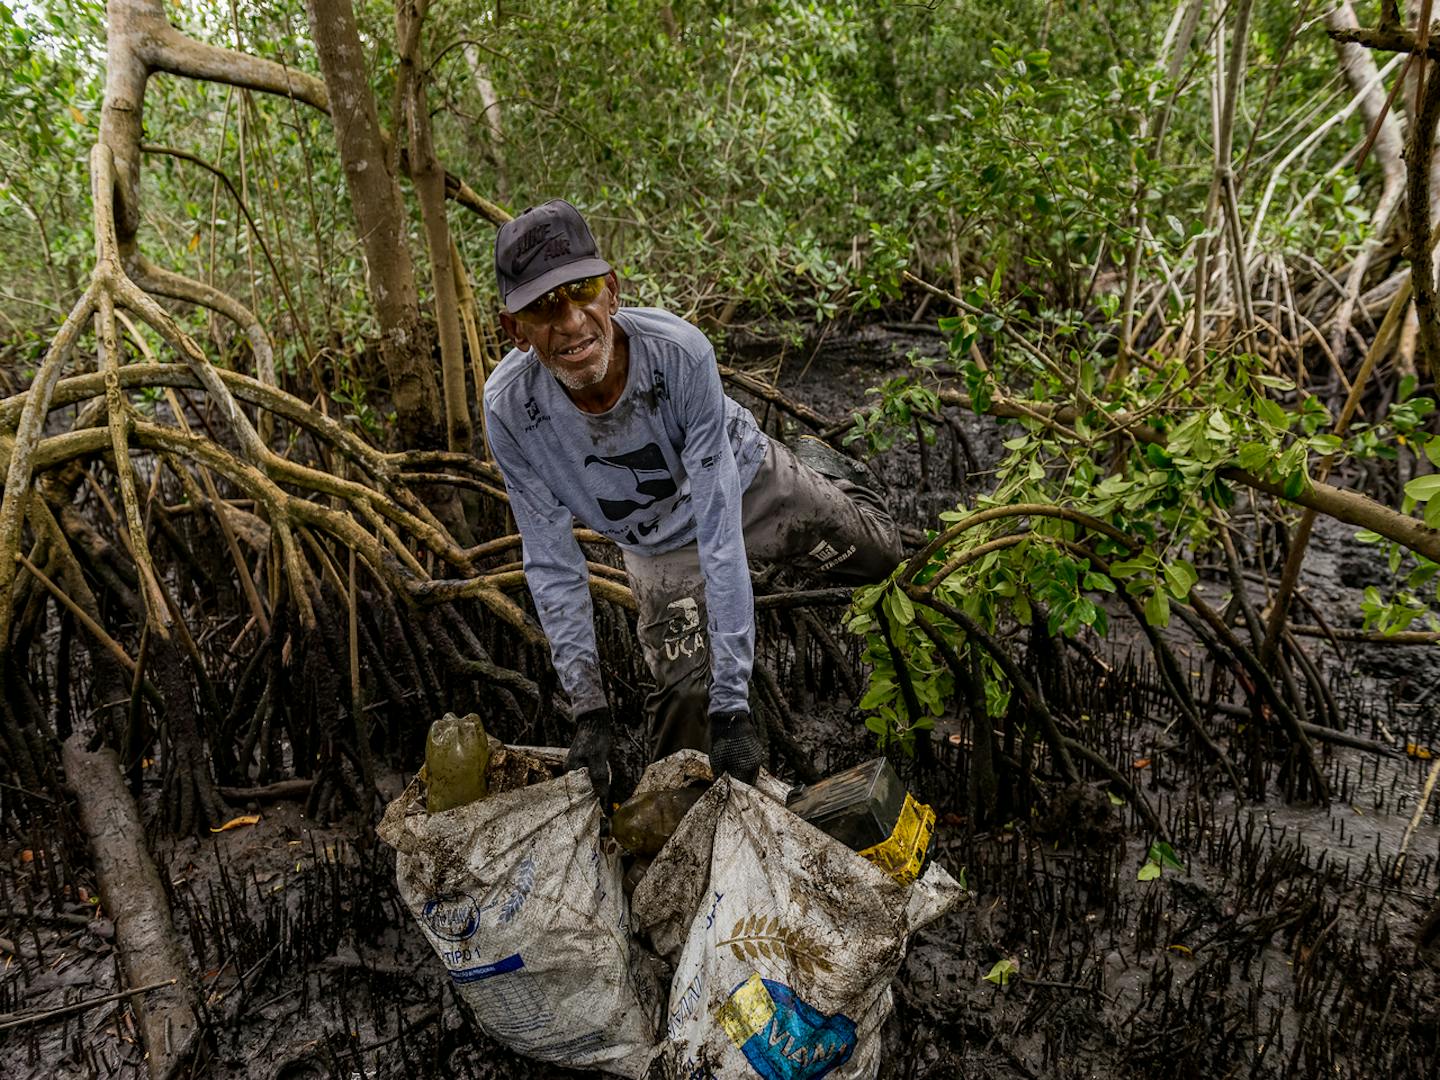 Brazilian crab collectors protect their income by cleaning mangroves